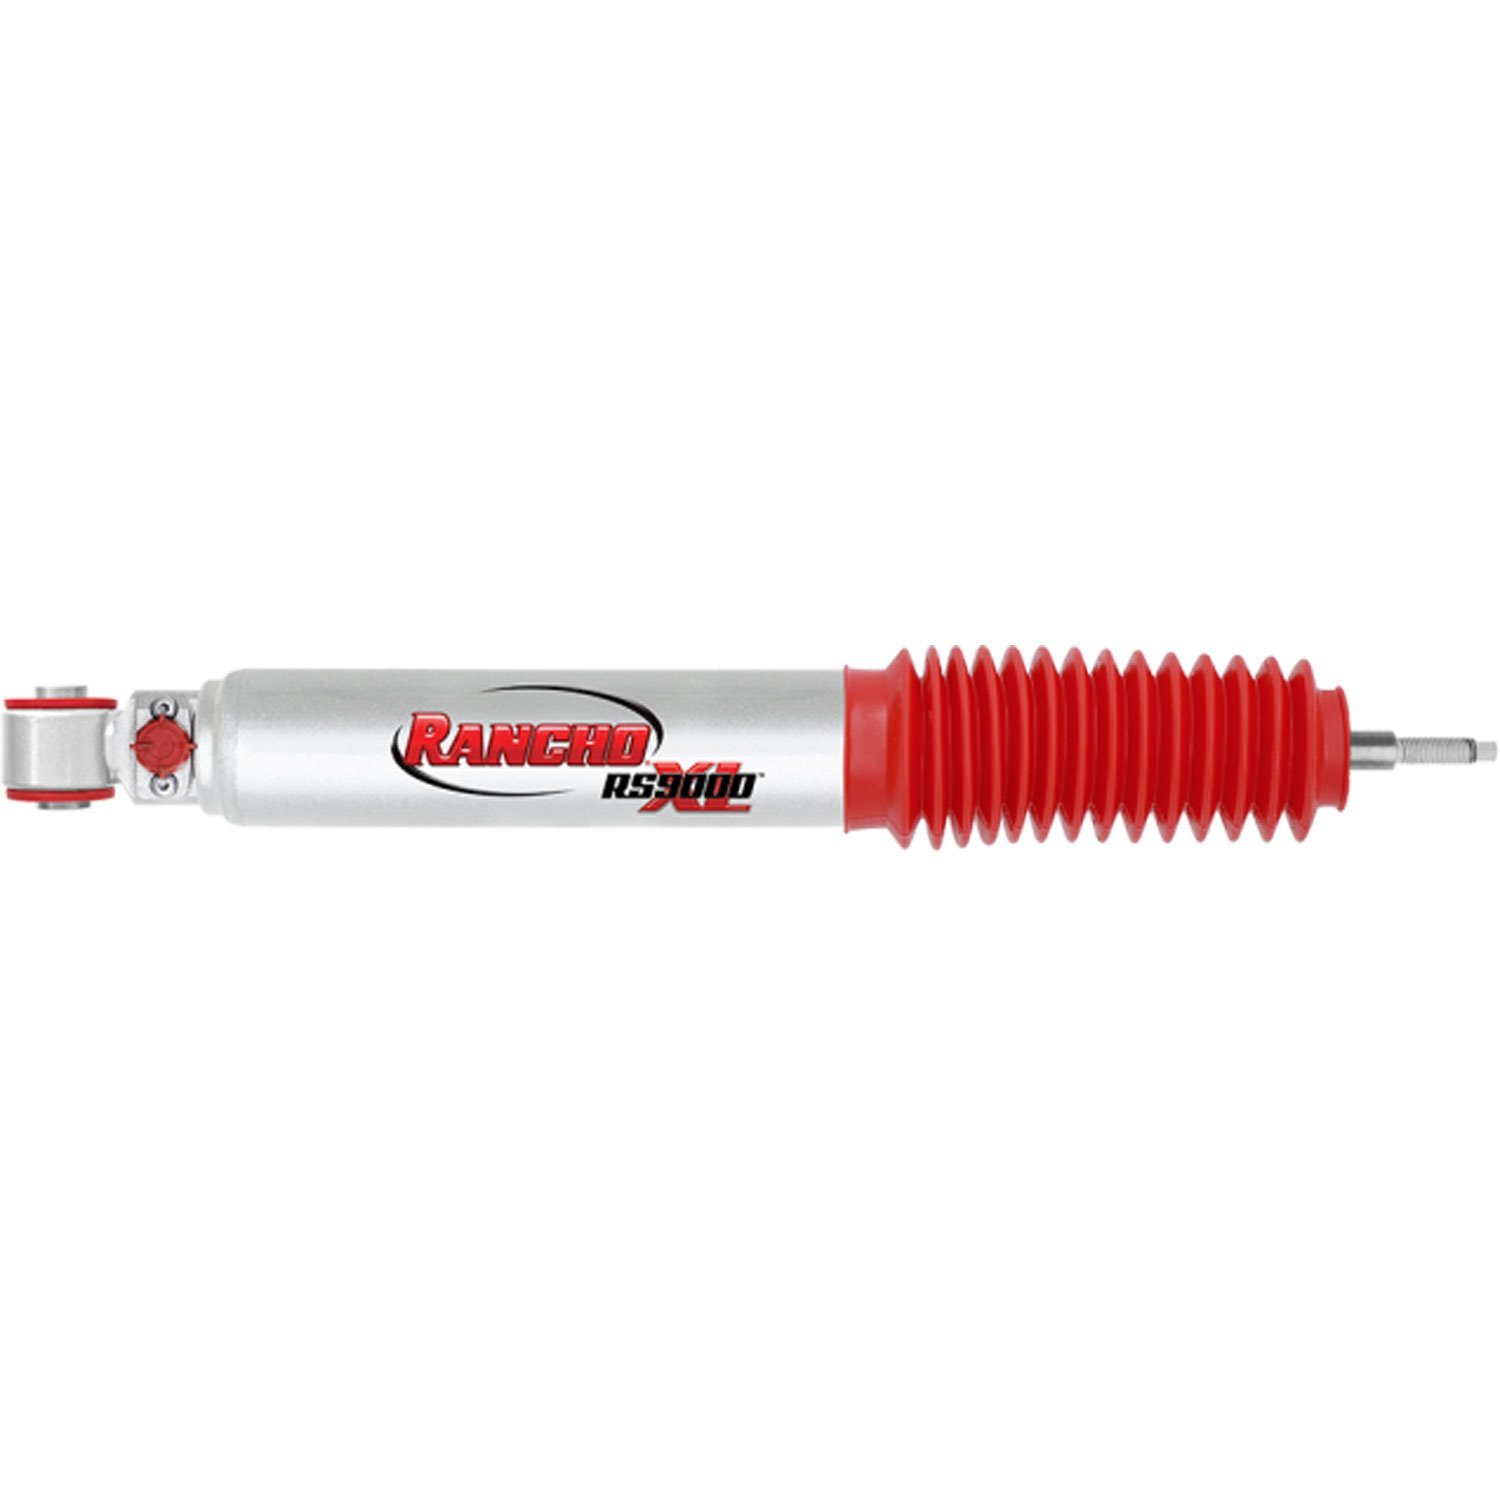 RS9000XL Front Shock Absorber Fits Dodge Dakota, Durango, Ford Bronco and F-Series Pickups